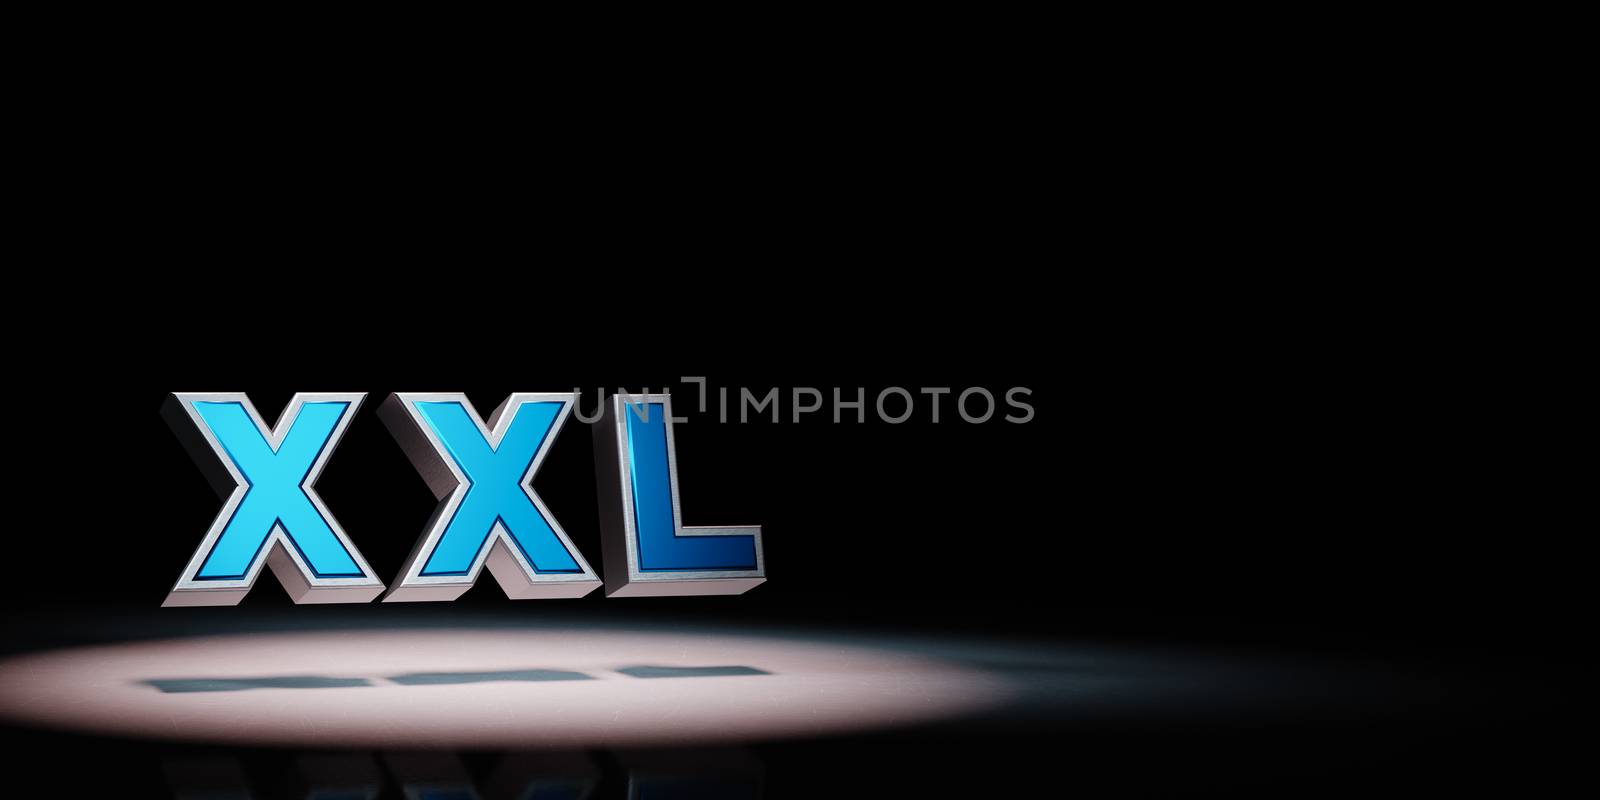 XXL Text Spotlighted on Black Background by make